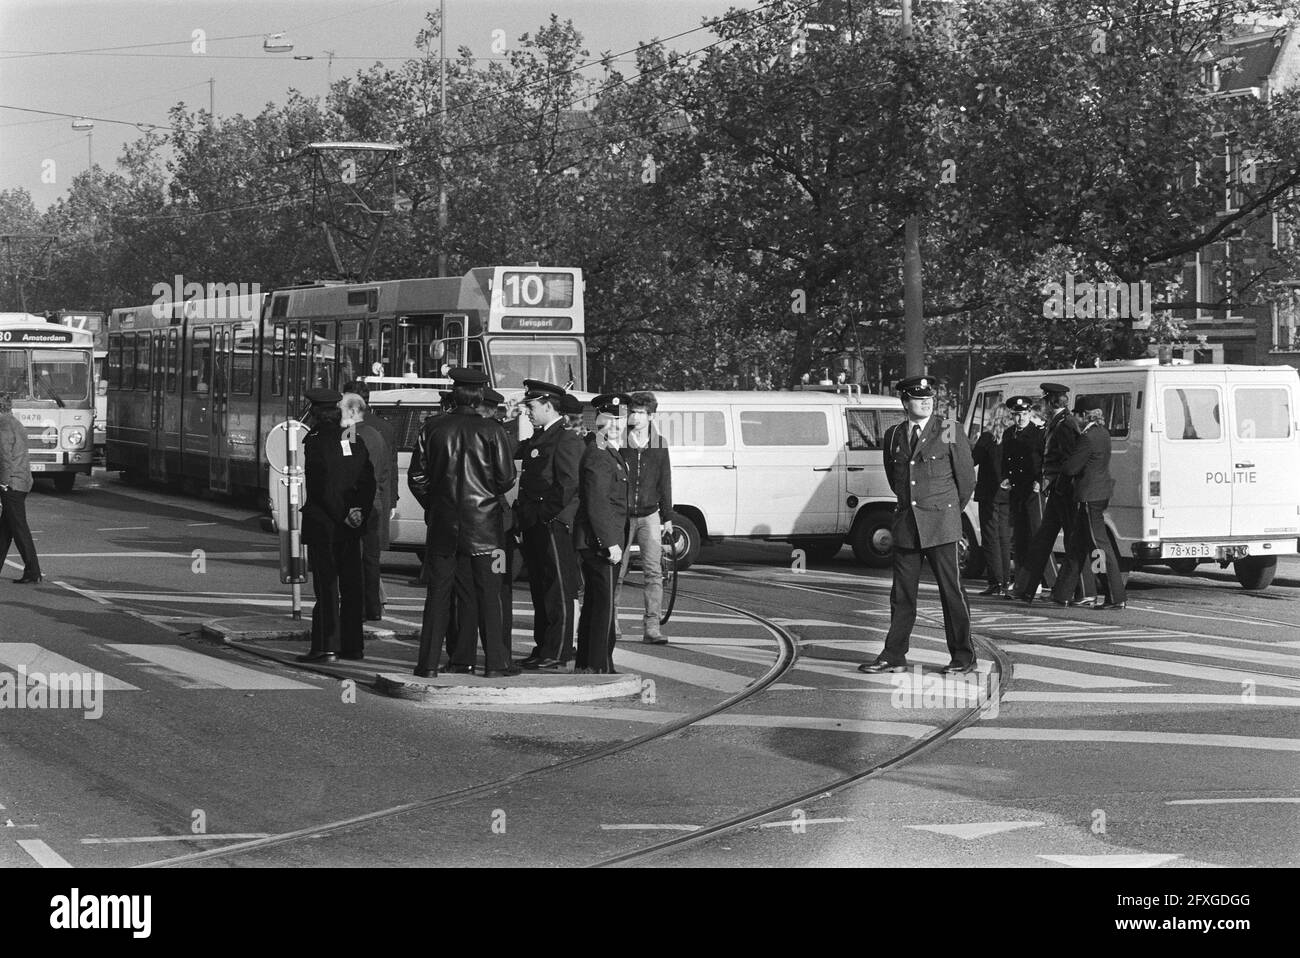 Barricading the intersection at the main office, November 7, 1983, actions, cars, blockades, wage and price policy, police, The Netherlands, 20th century press agency photo, news to remember, documentary, historic photography 1945-1990, visual stories, human history of the Twentieth Century, capturing moments in time Stock Photo